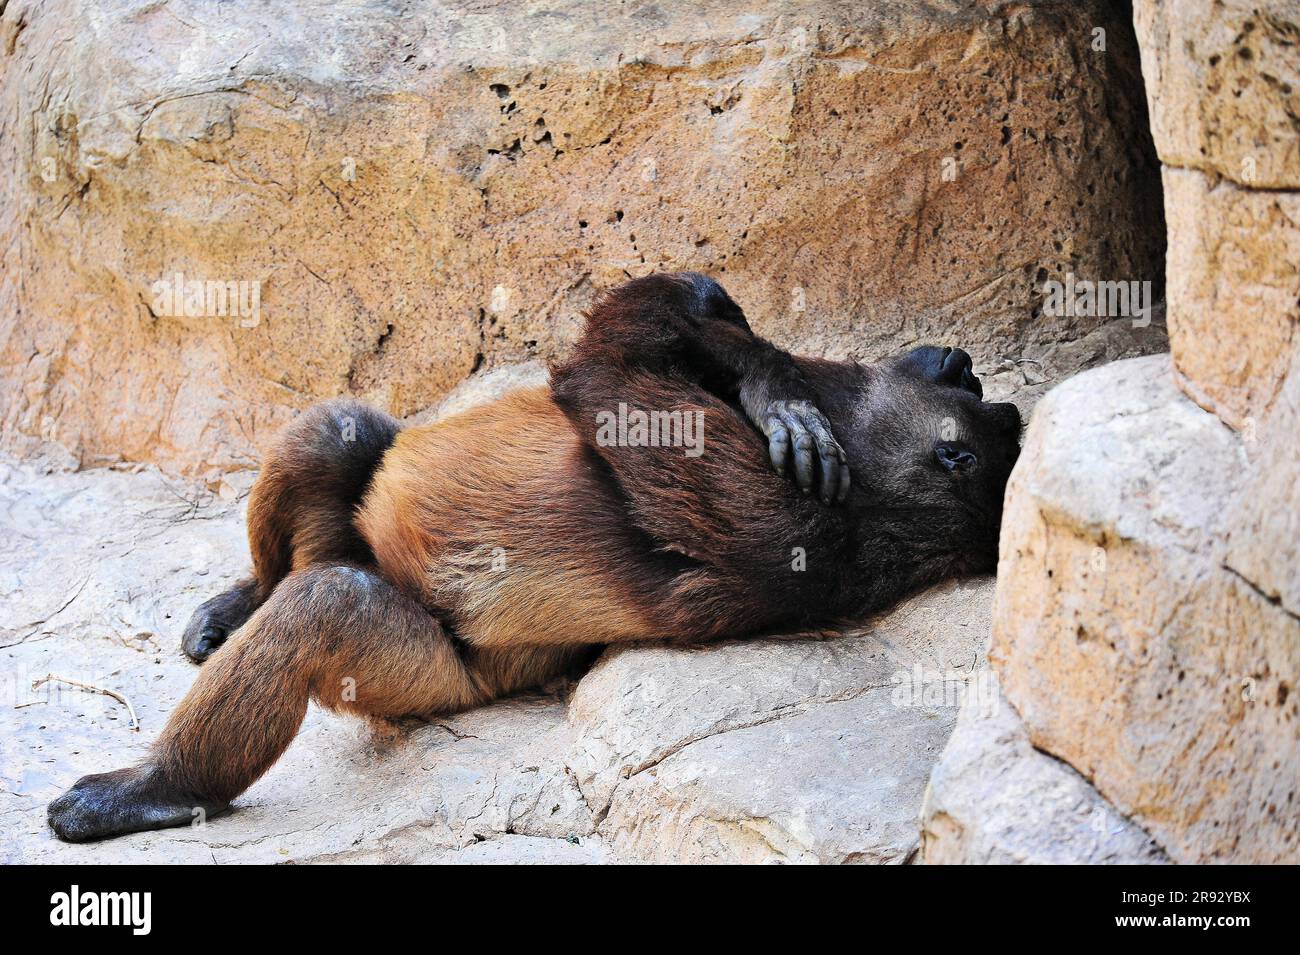 A side view of a large gorilla resting on his back on a hard surface at Glady's Porter Zoo in Brownsville, Texas, U.S.A.. Stock Photo